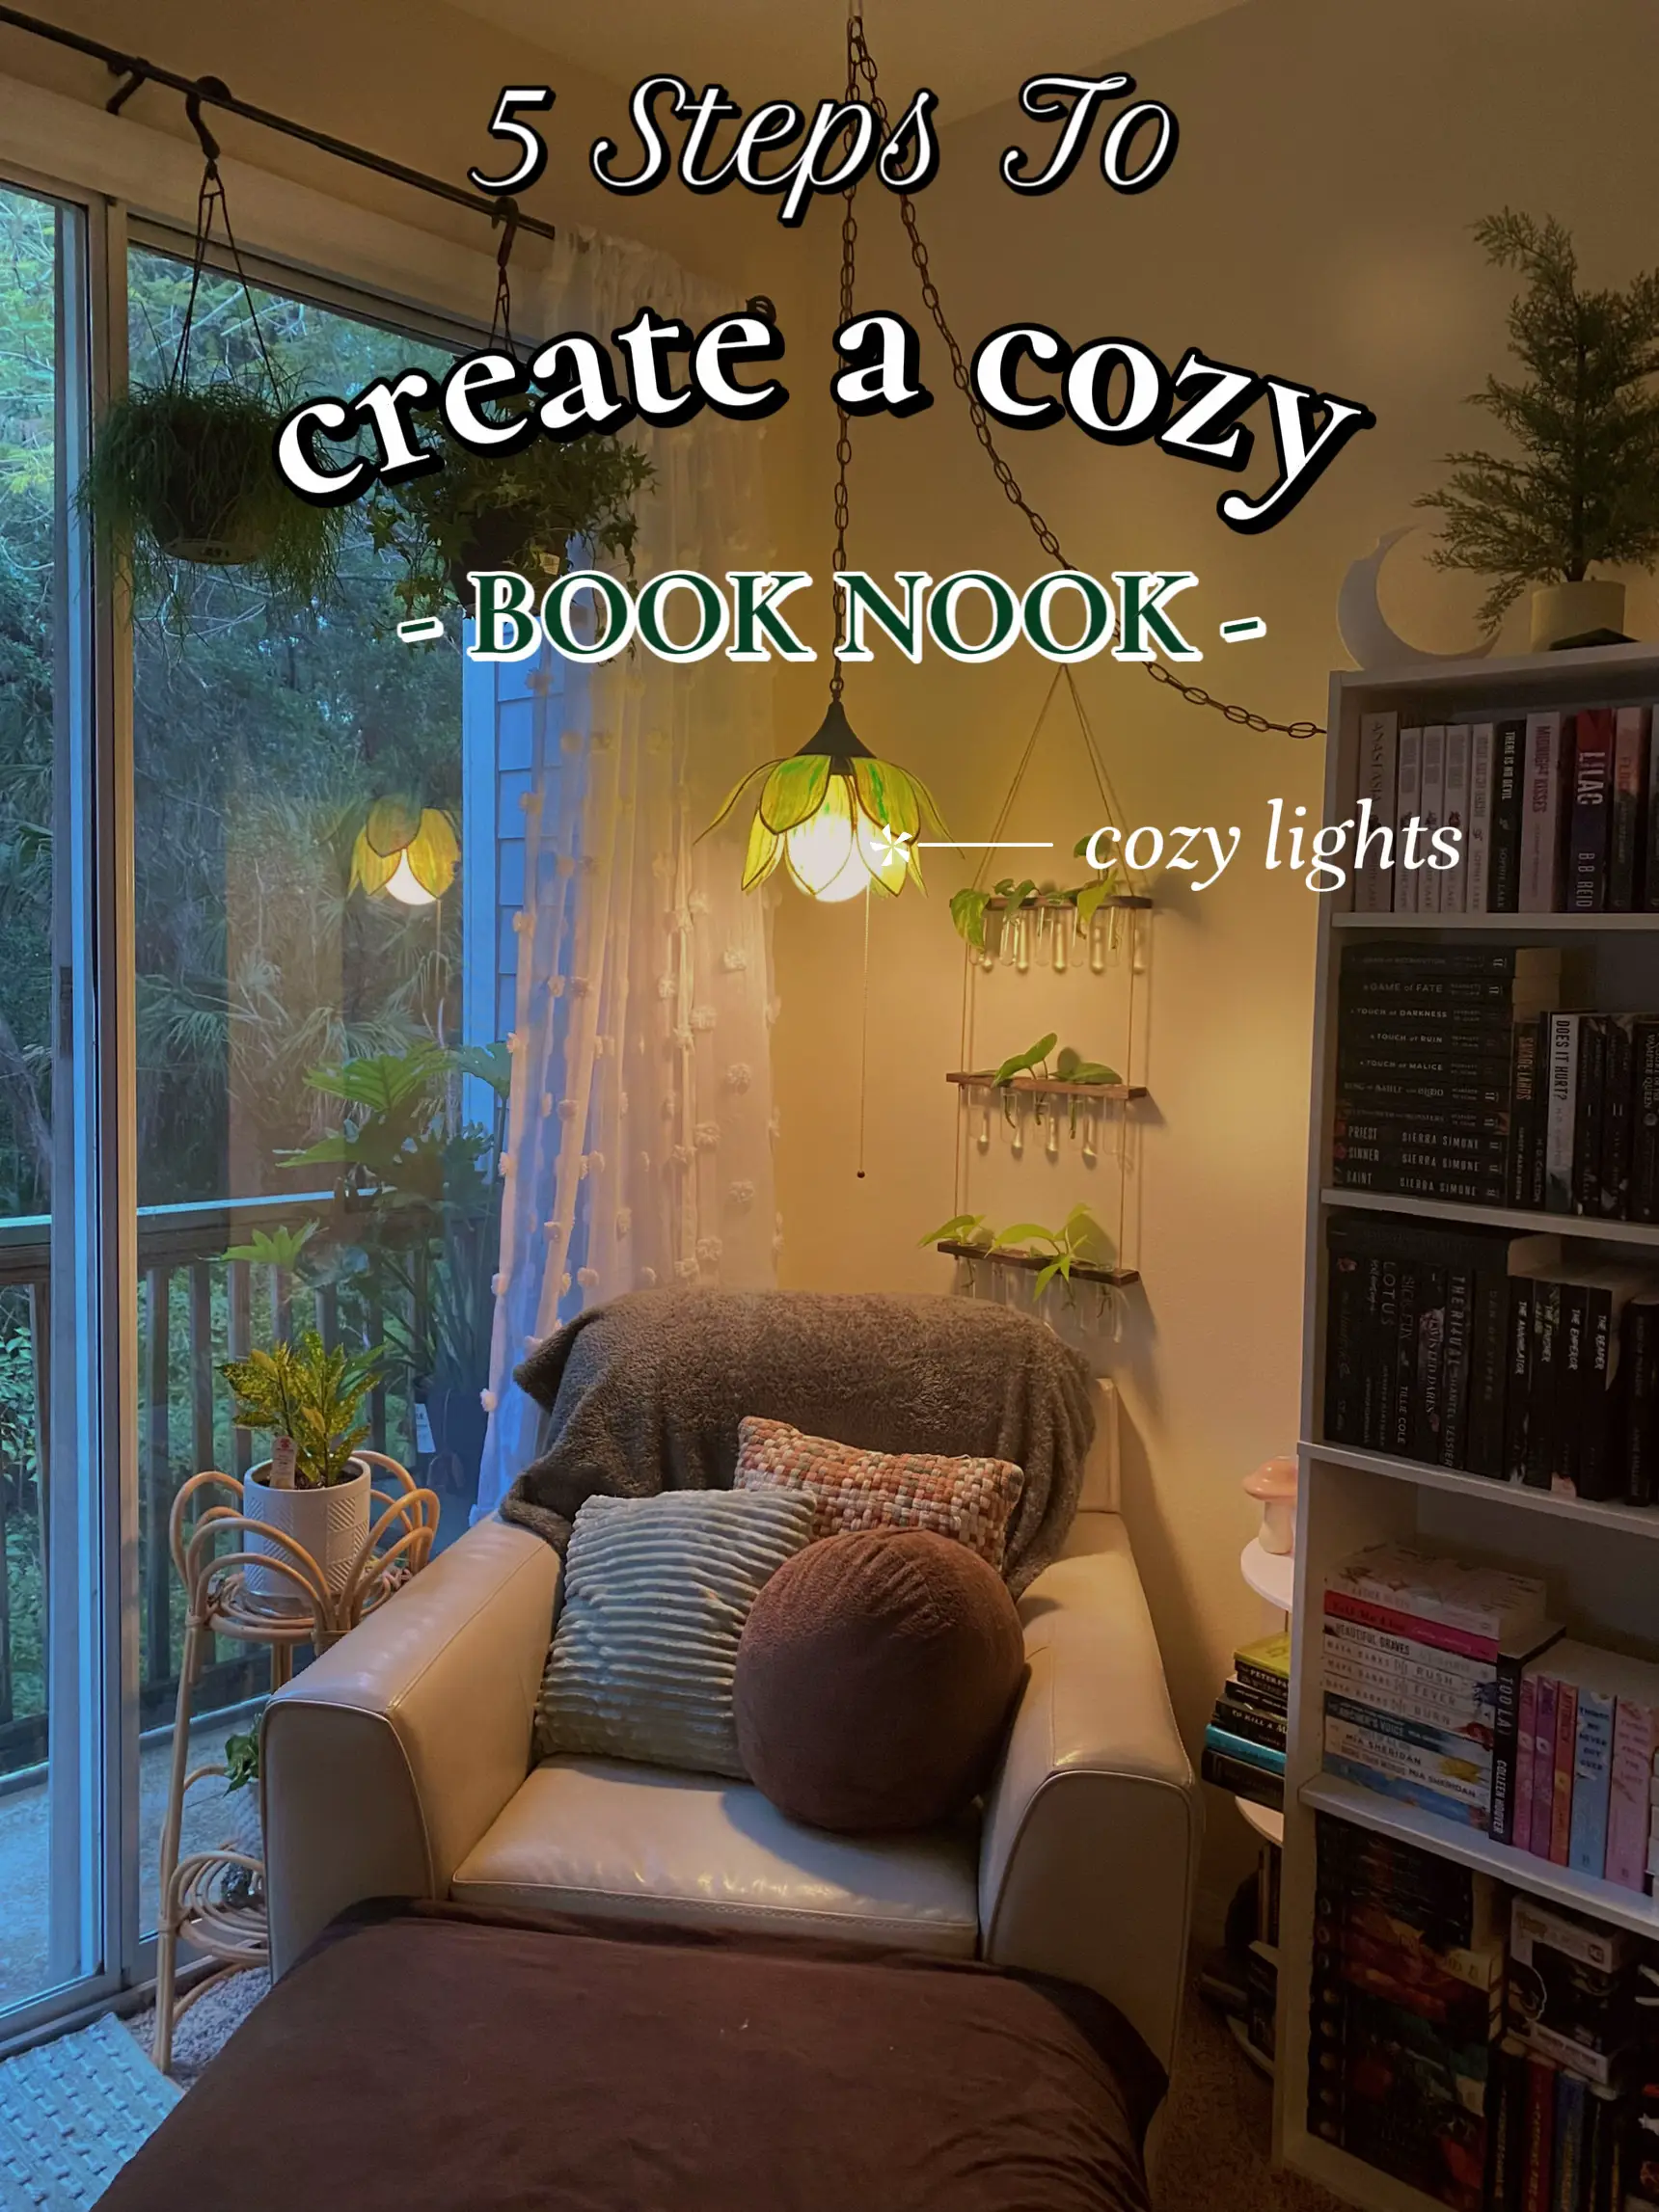 This Adorable “Book Nook” Is the Perfect Bibliophile Aesthetic DIY